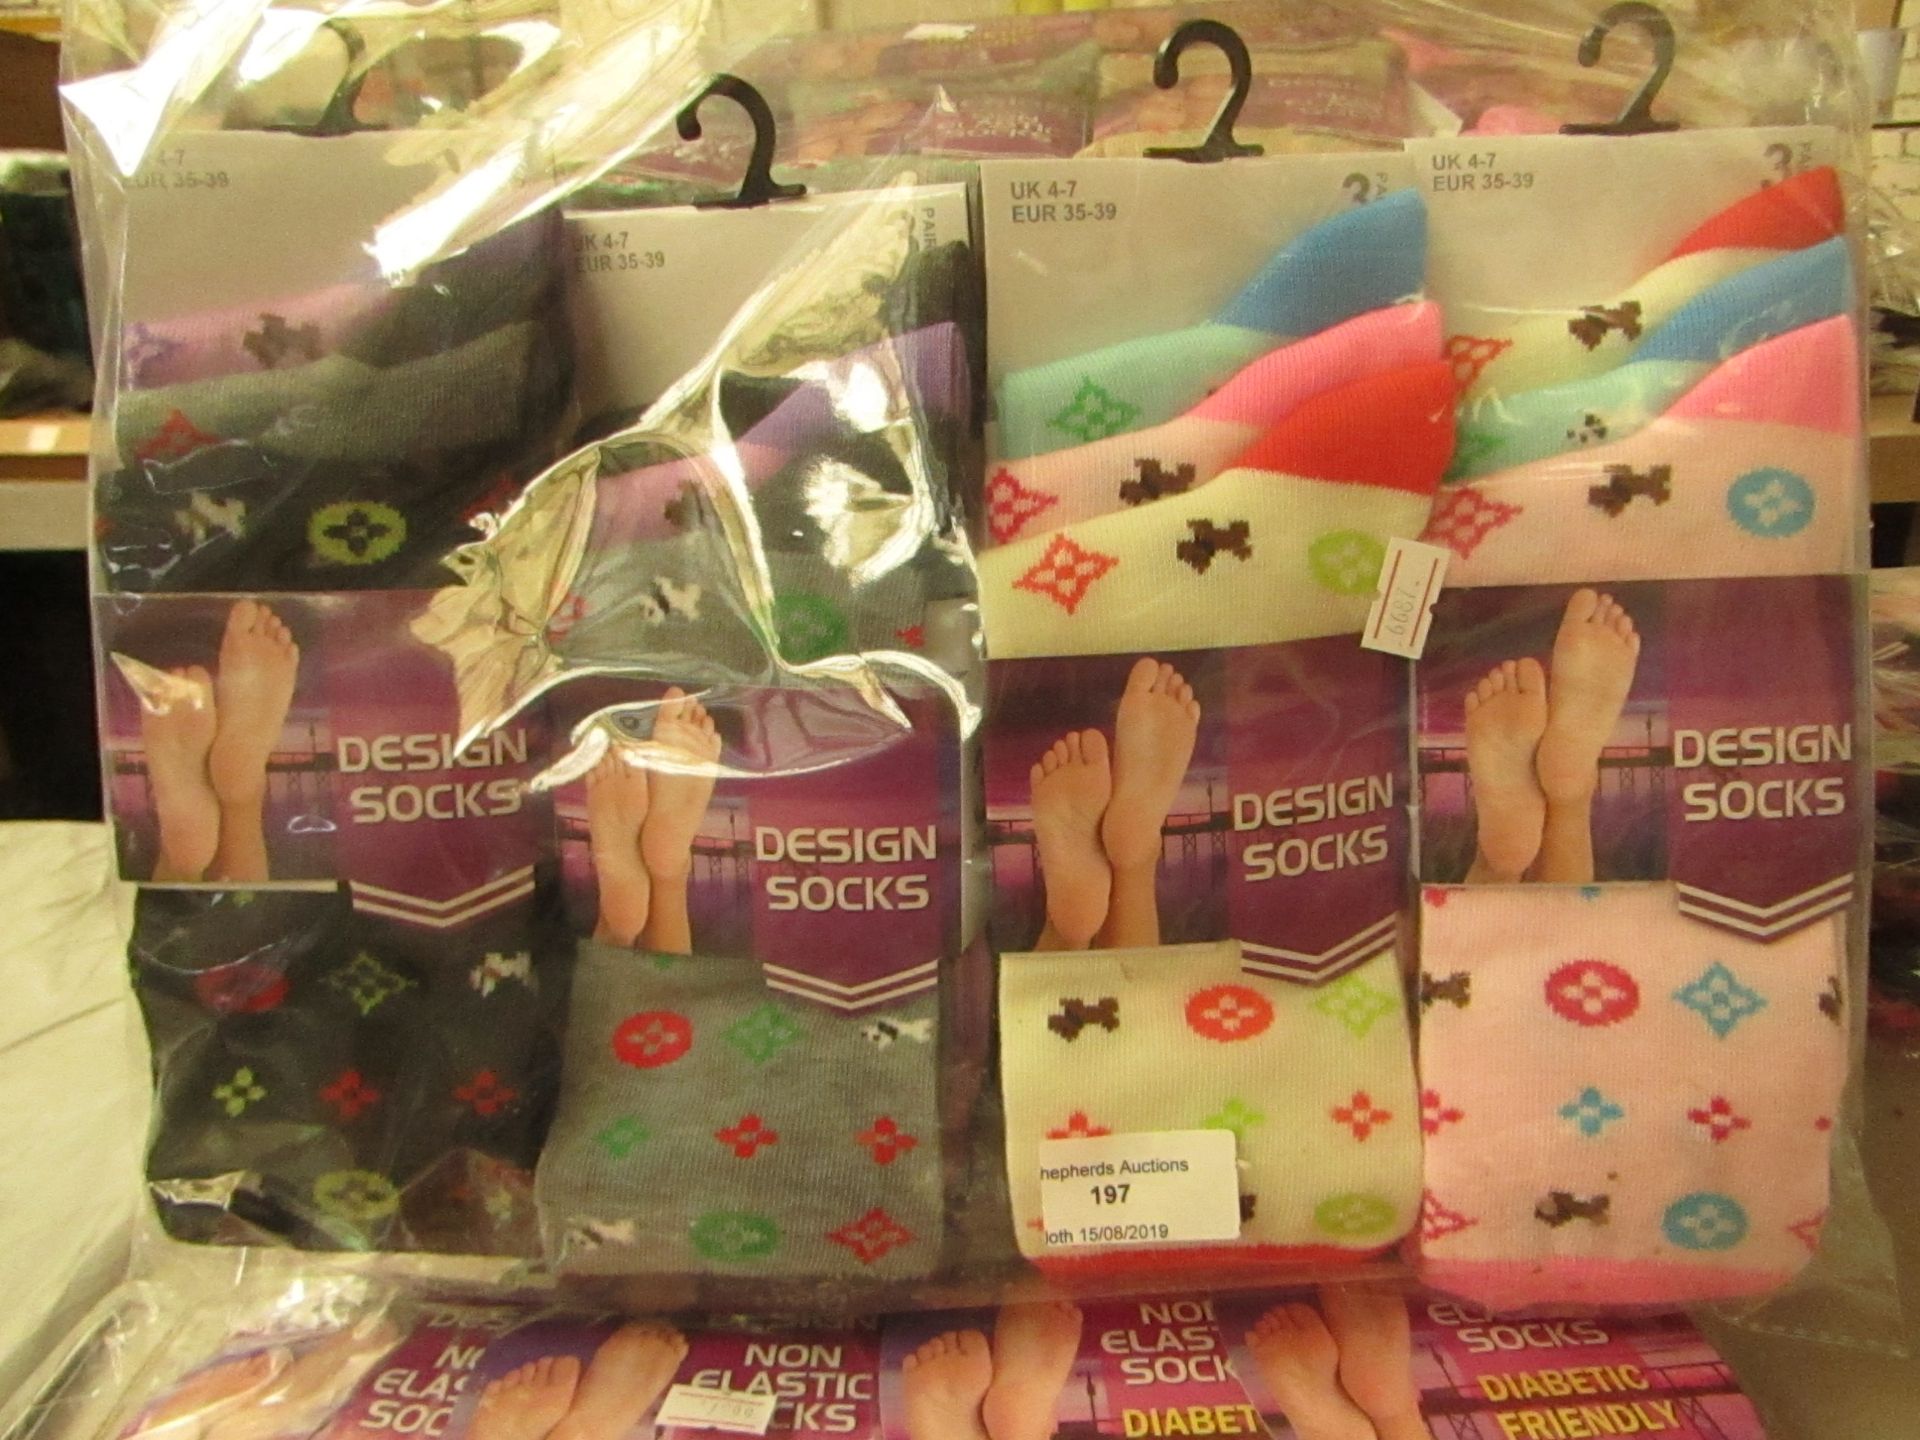 12 x pairs of Ladies Design Socks size 4-6 new & packaged